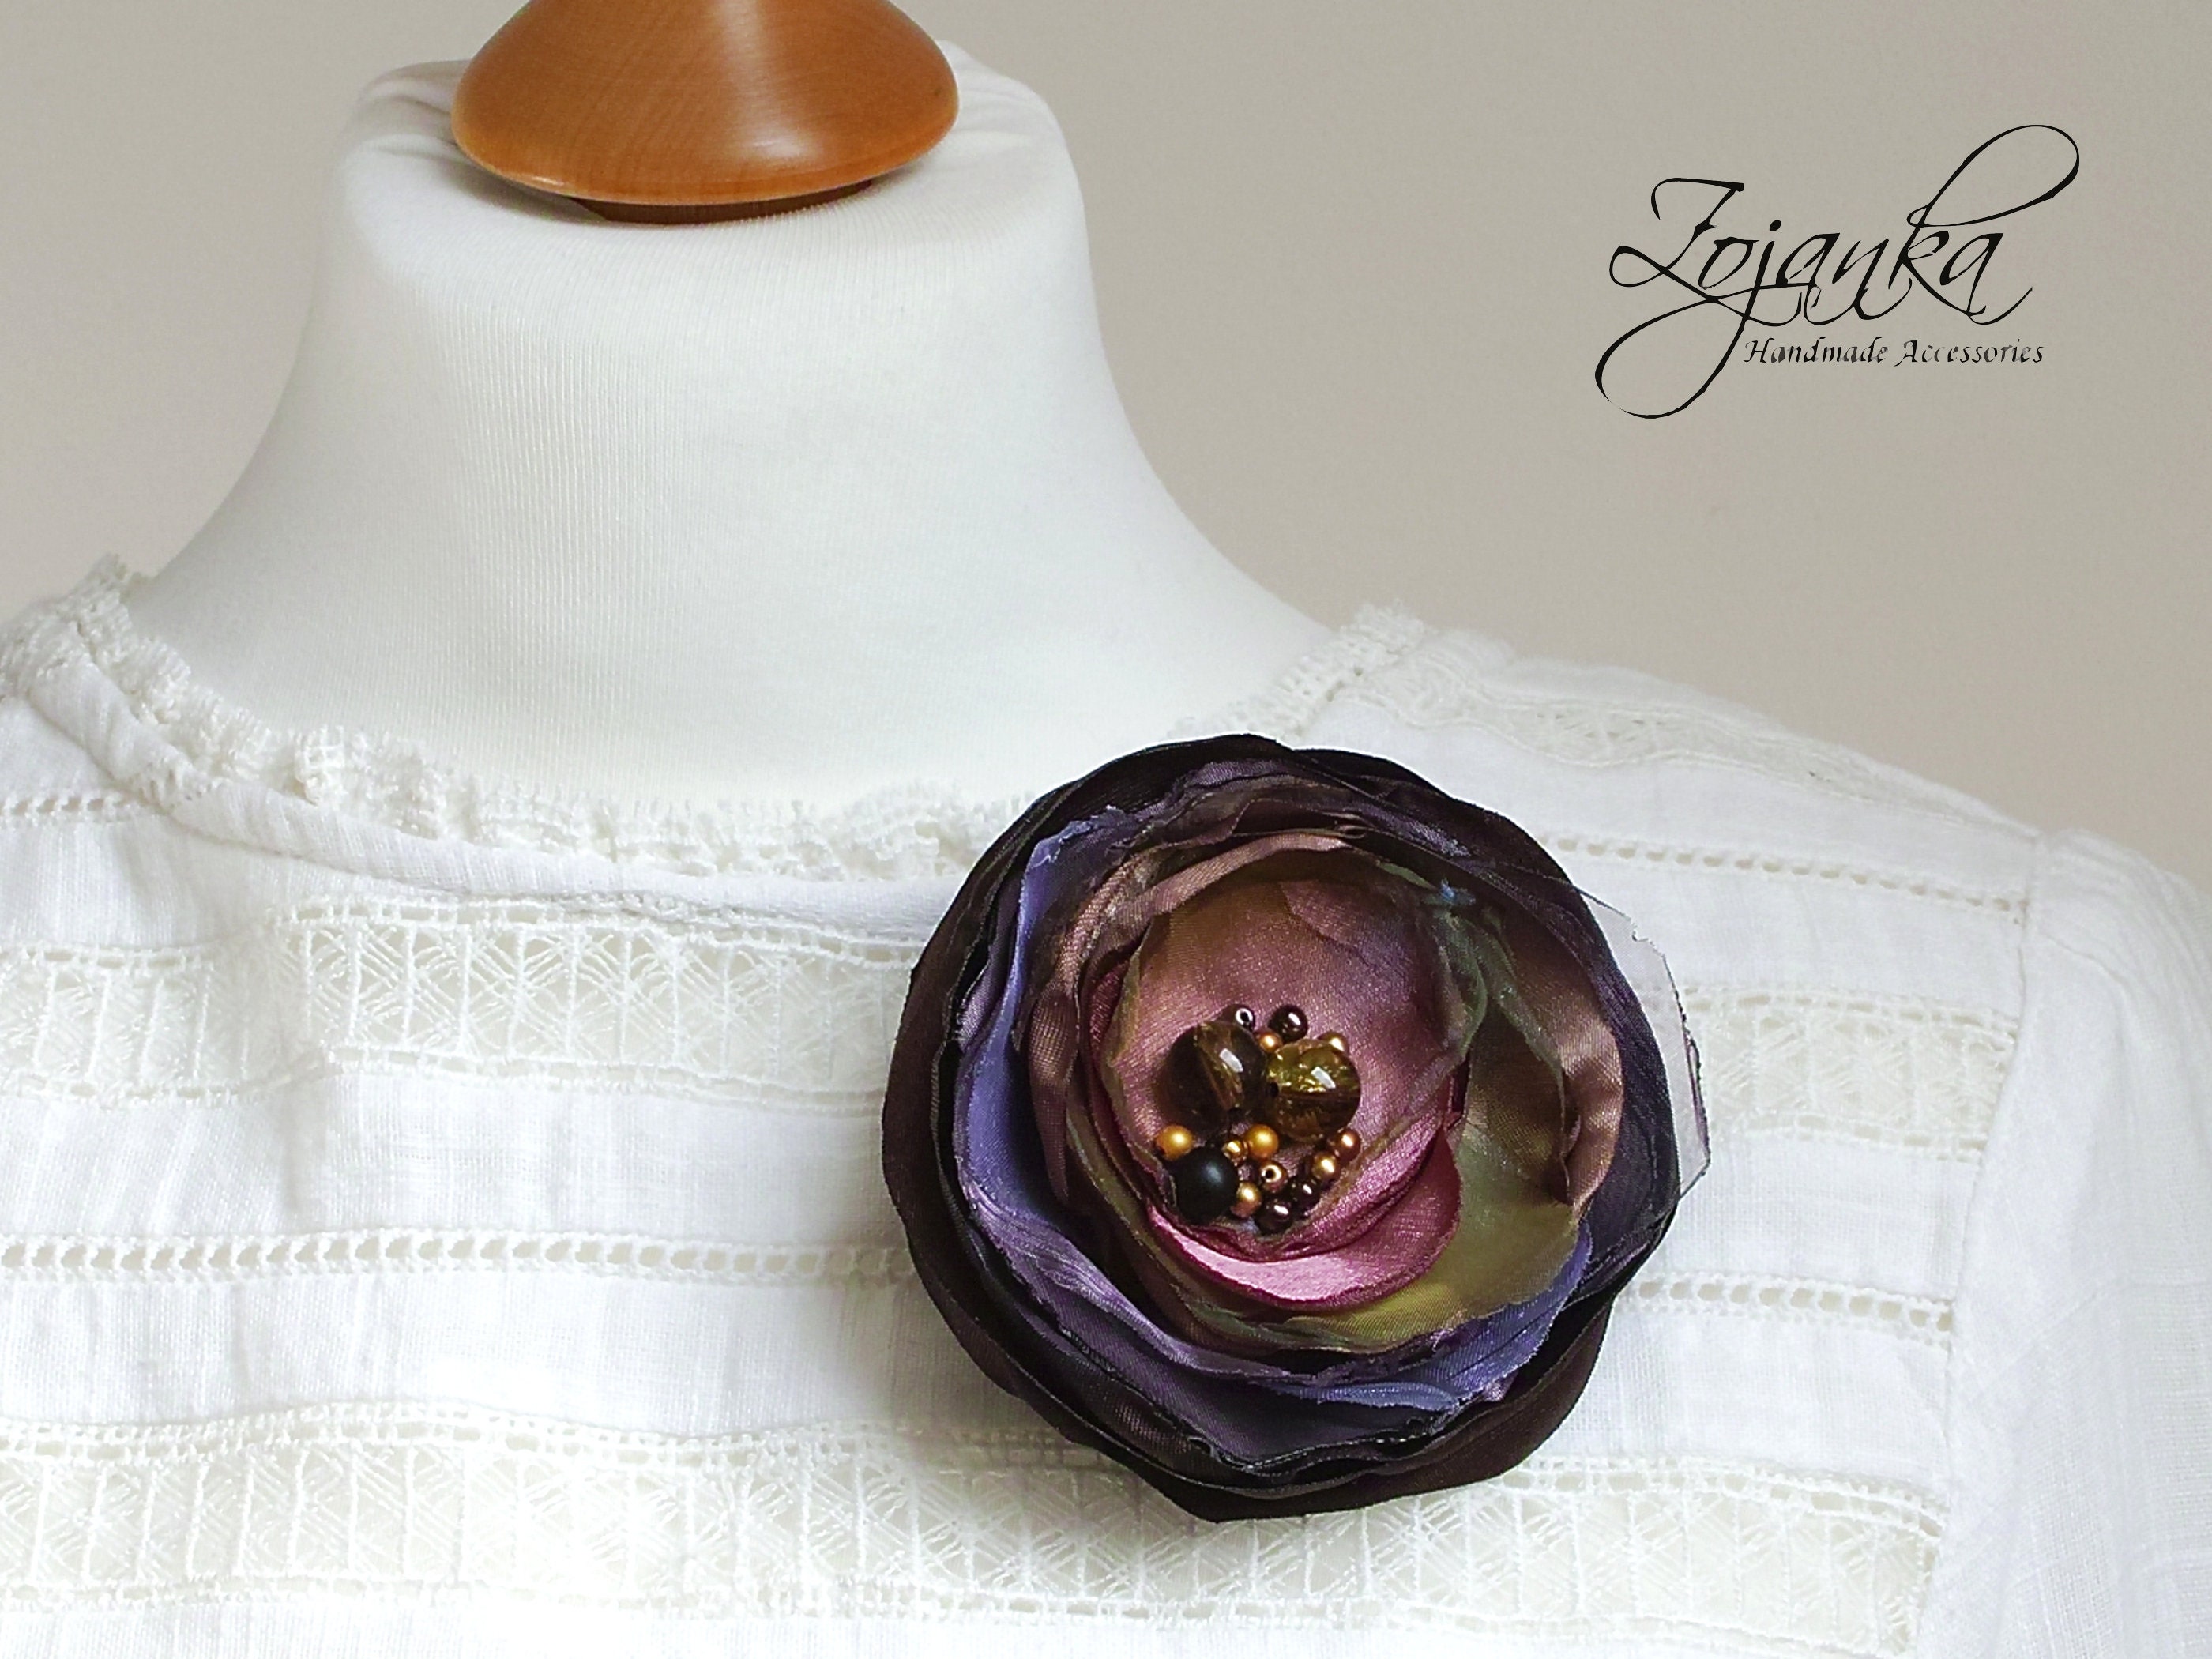 LARGE flower Pin brooch for (dress) handmade fabric floral brooch, women  accessories, flower pin button for dresses